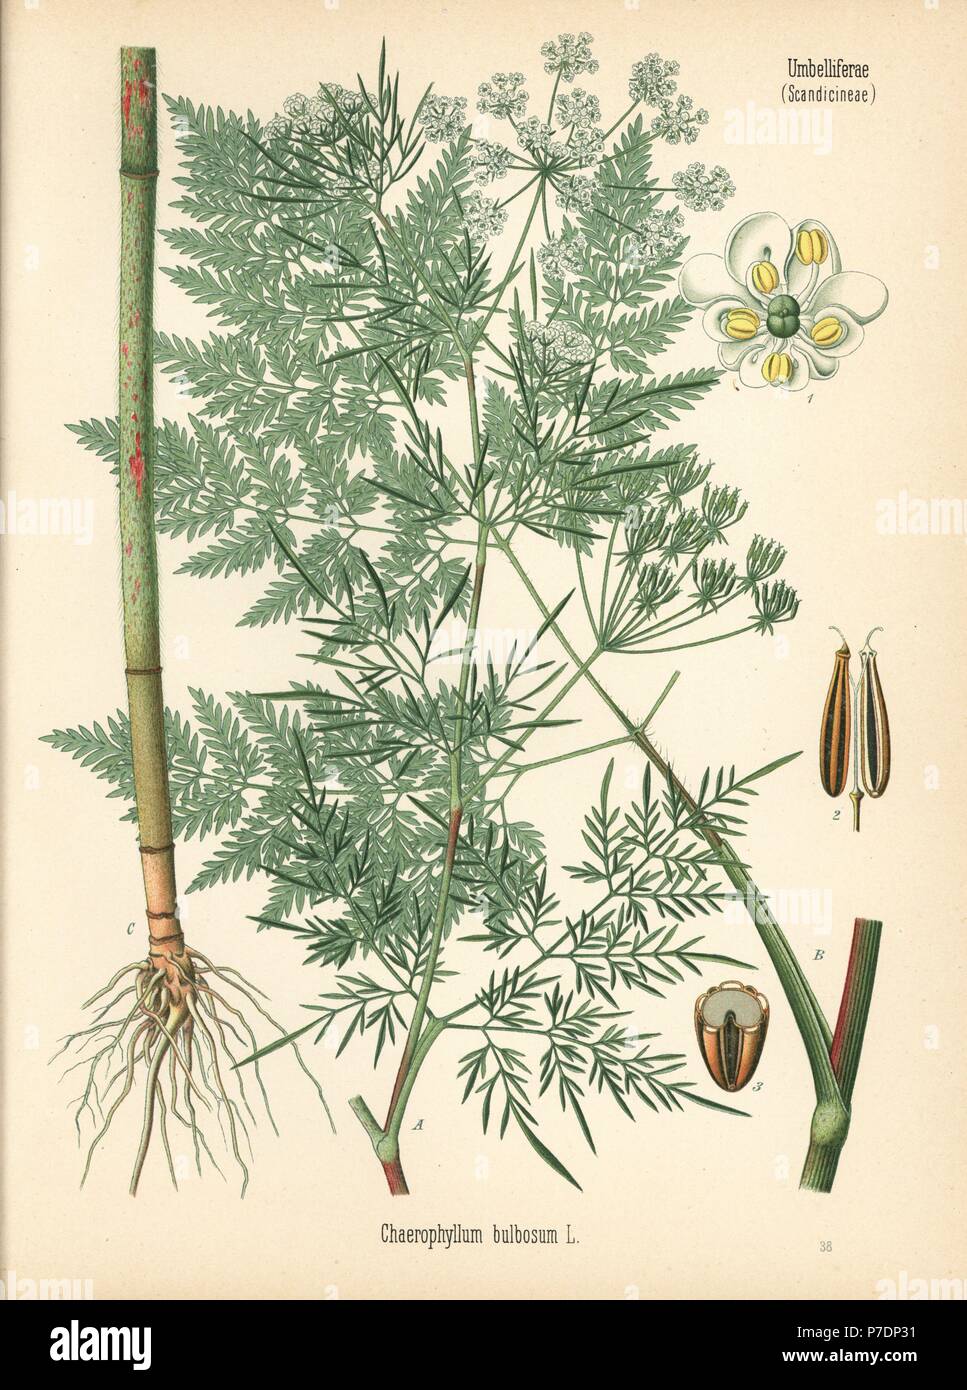 Turnip-rooted chervil, Chaerophyllum bulbosum. Chromolithograph after a botanical illustration from Hermann Adolph Koehler's Medicinal Plants, edited by Gustav Pabst, Koehler, Germany, 1887. Stock Photo